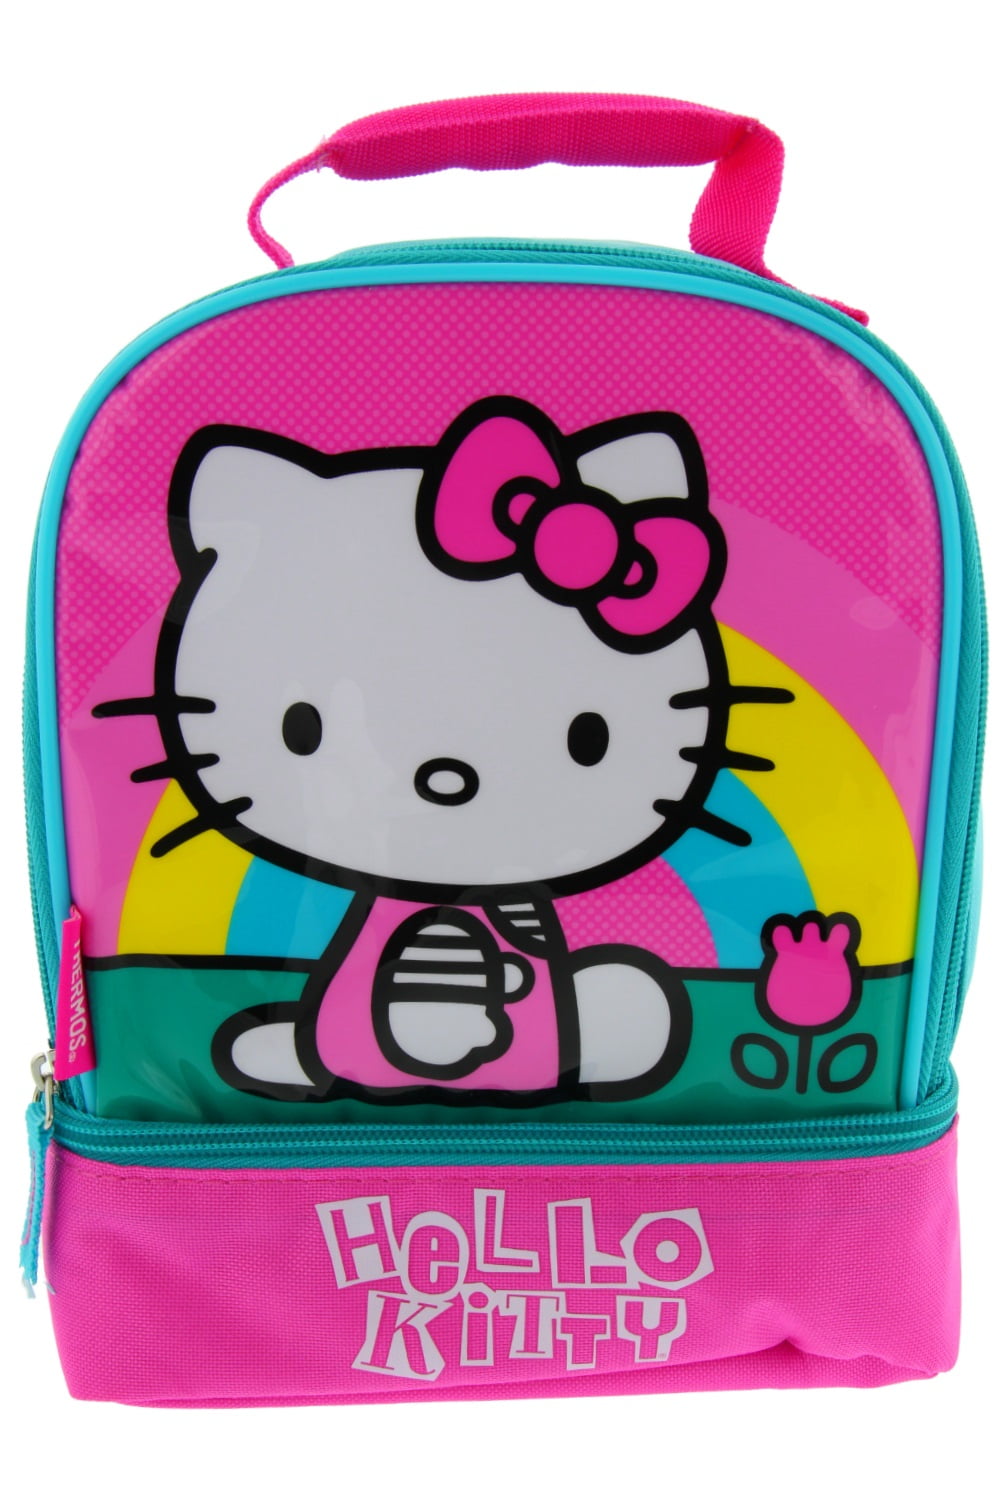 Kids Lunch Box Hello Kitty Non-Spill Thermal Insulated Lunch box for School 